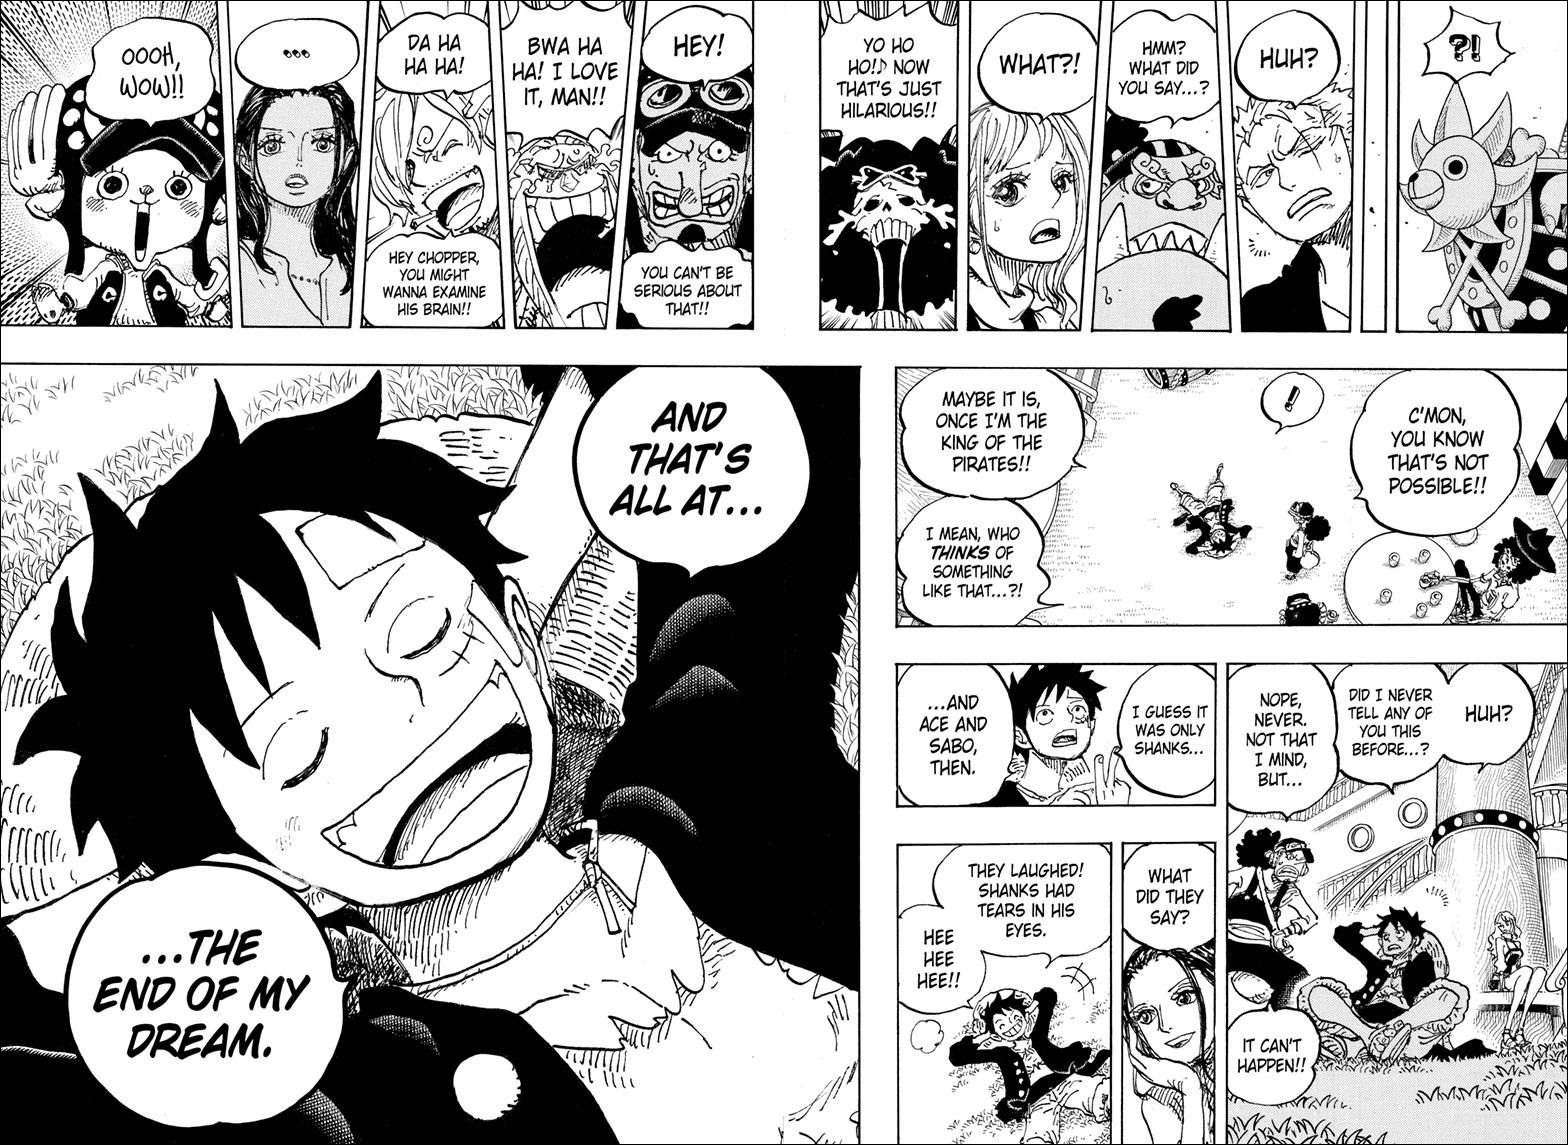 One Piece Chapter 1061 might reveal details about IM Sama & Sabo's  existence